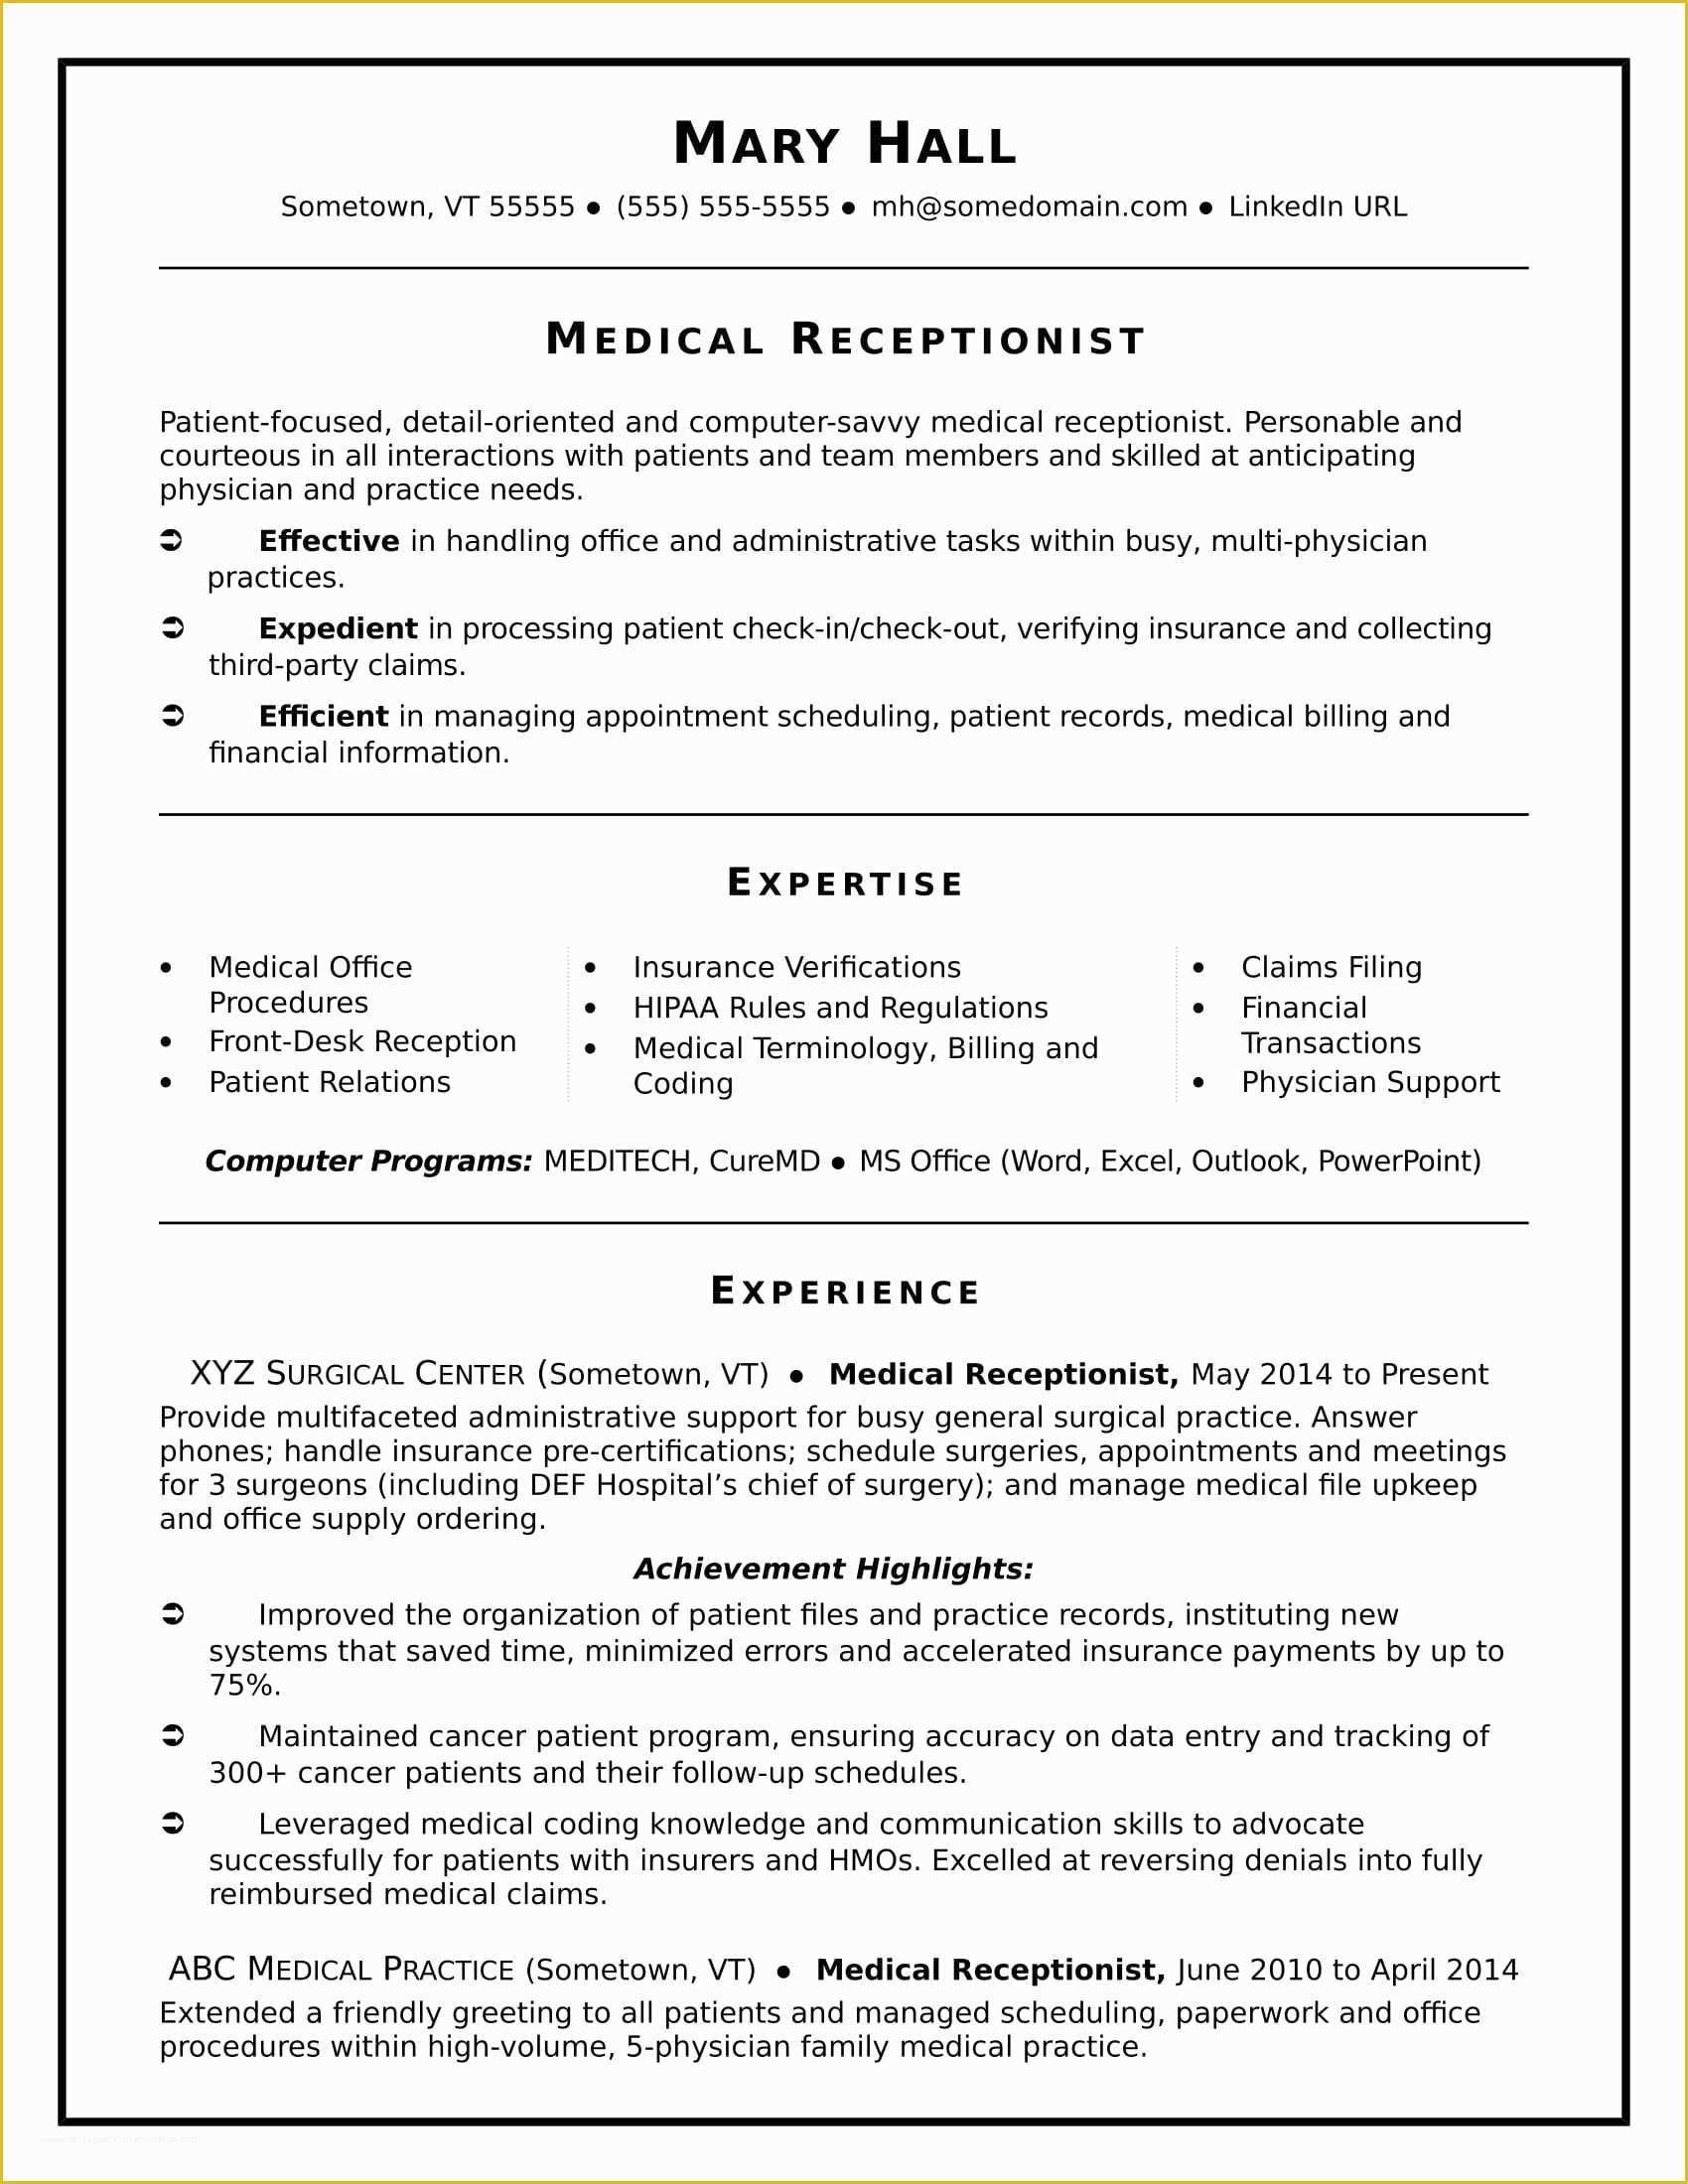 free-medical-resume-templates-microsoft-word-of-doctor-resume-template